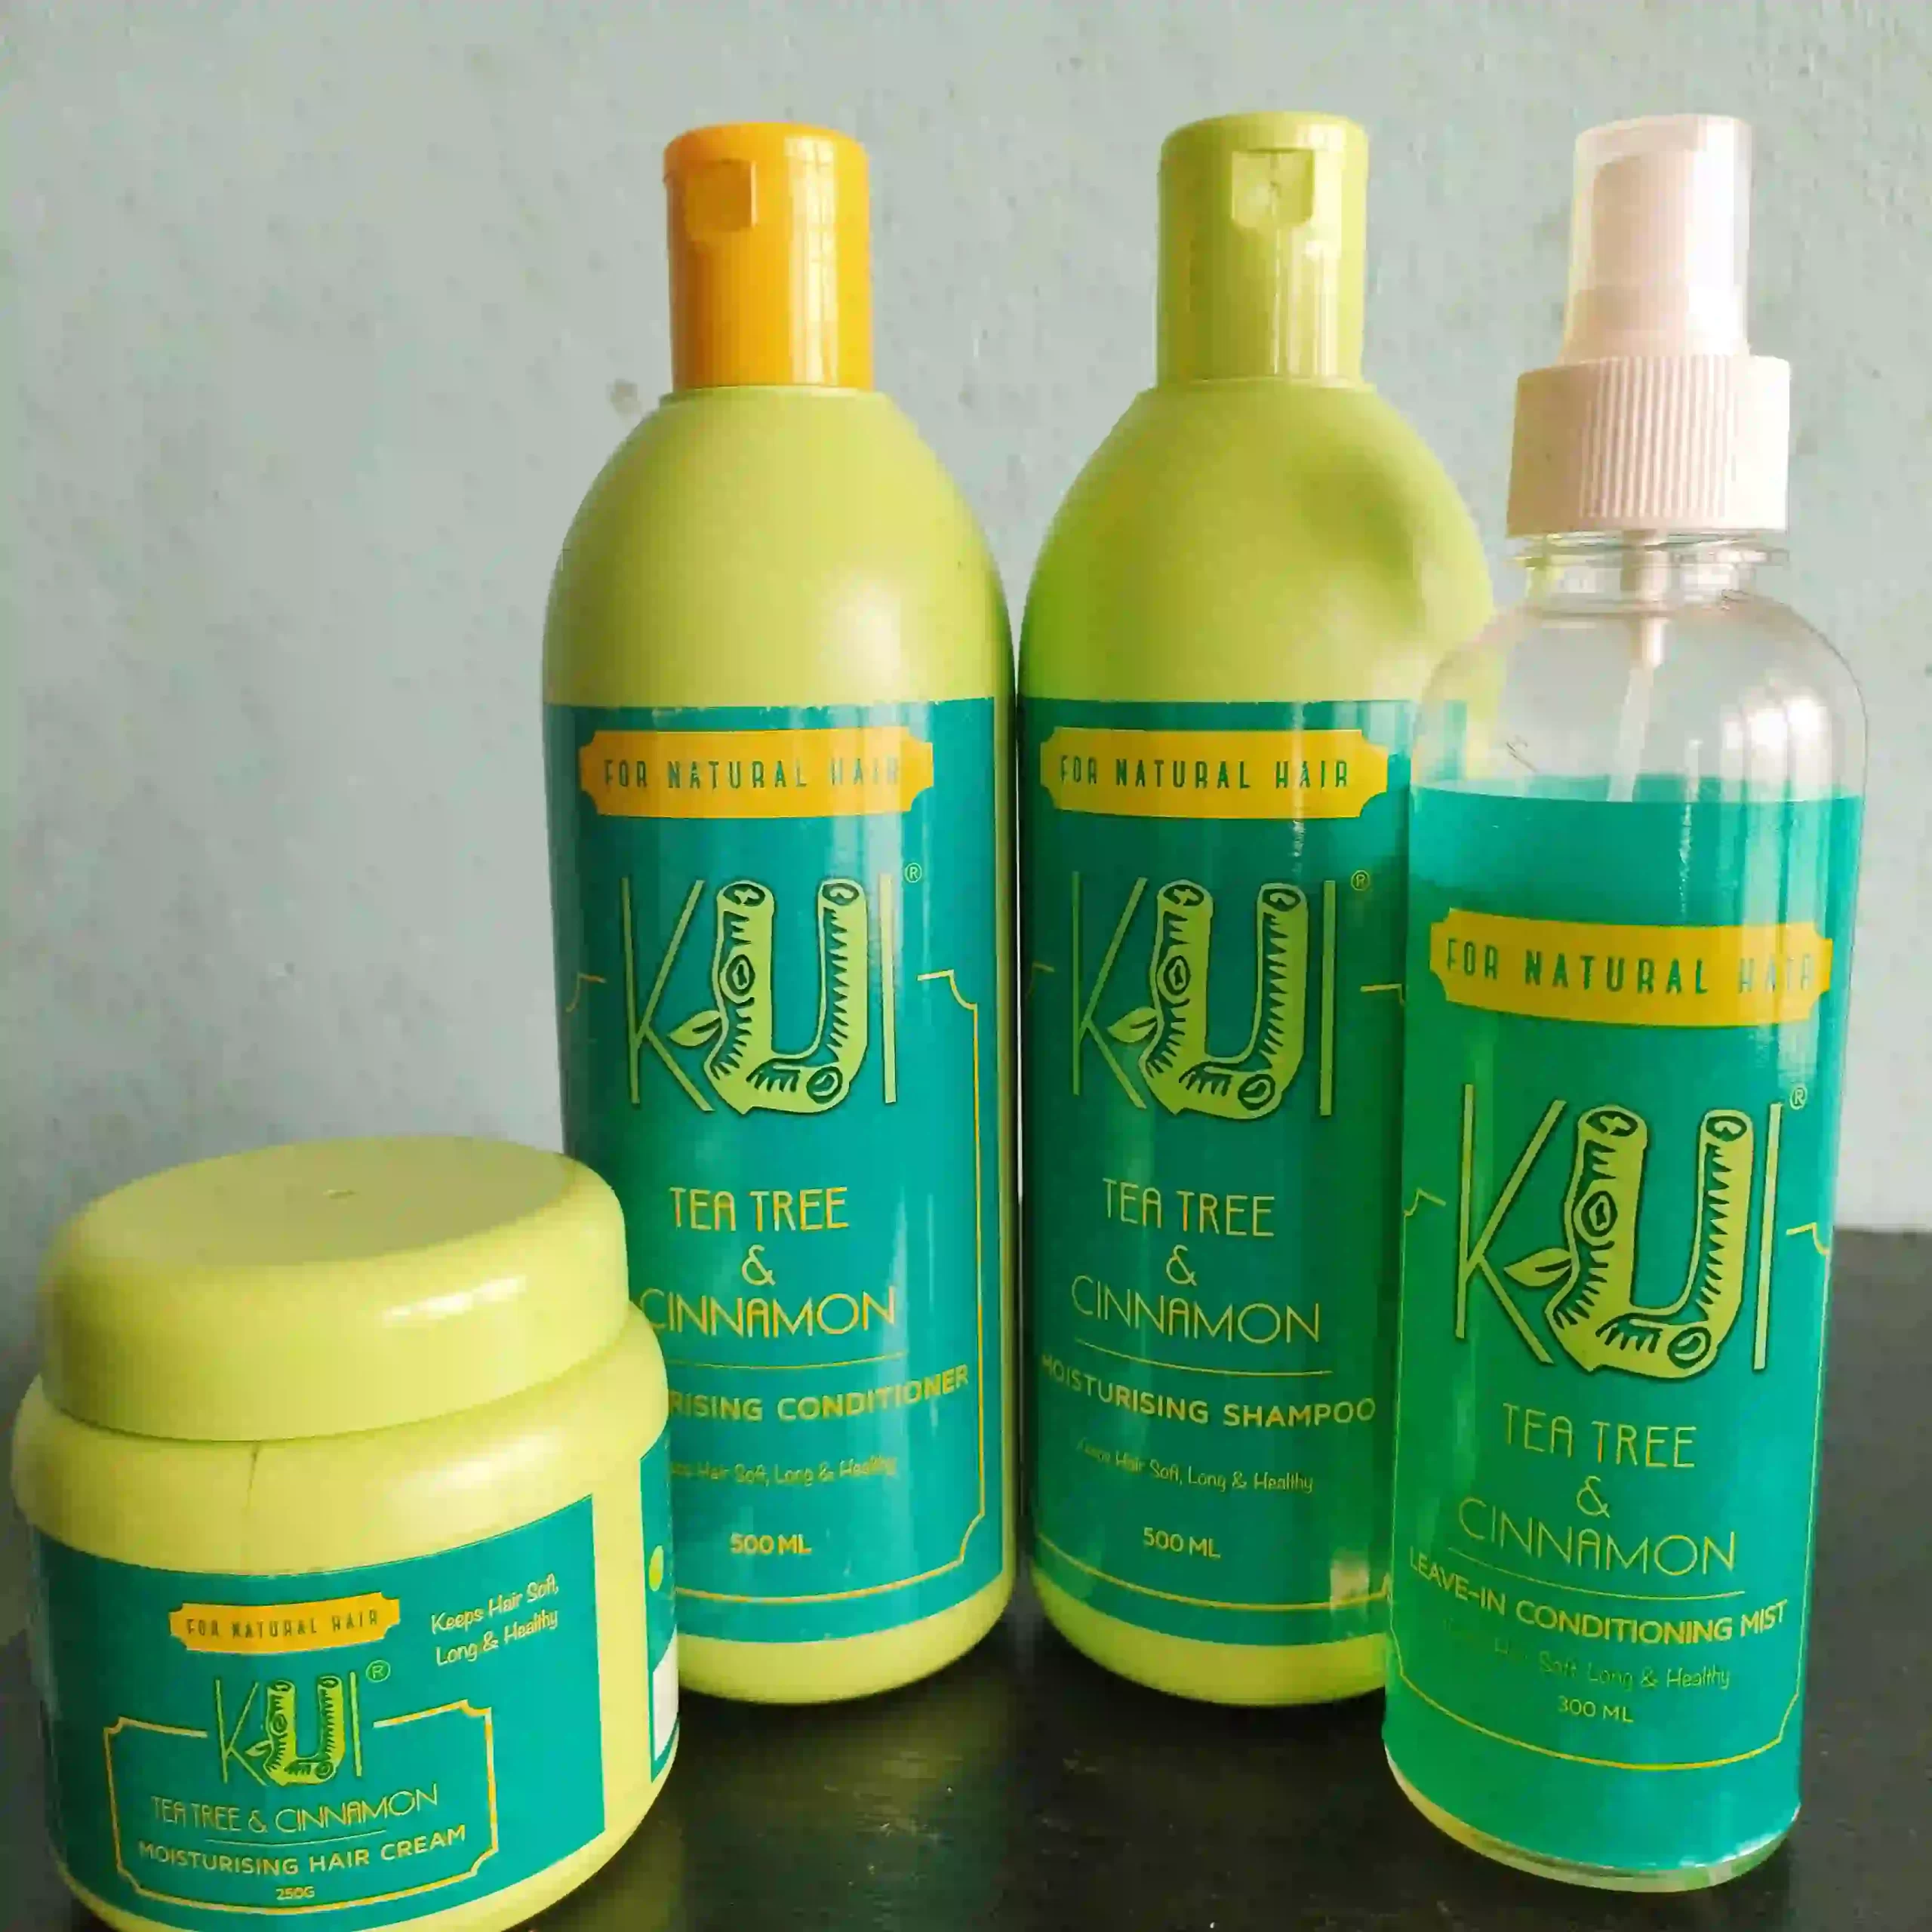 KUI Tea Tree And Cinnamon Hair Product Review For Natural Hair